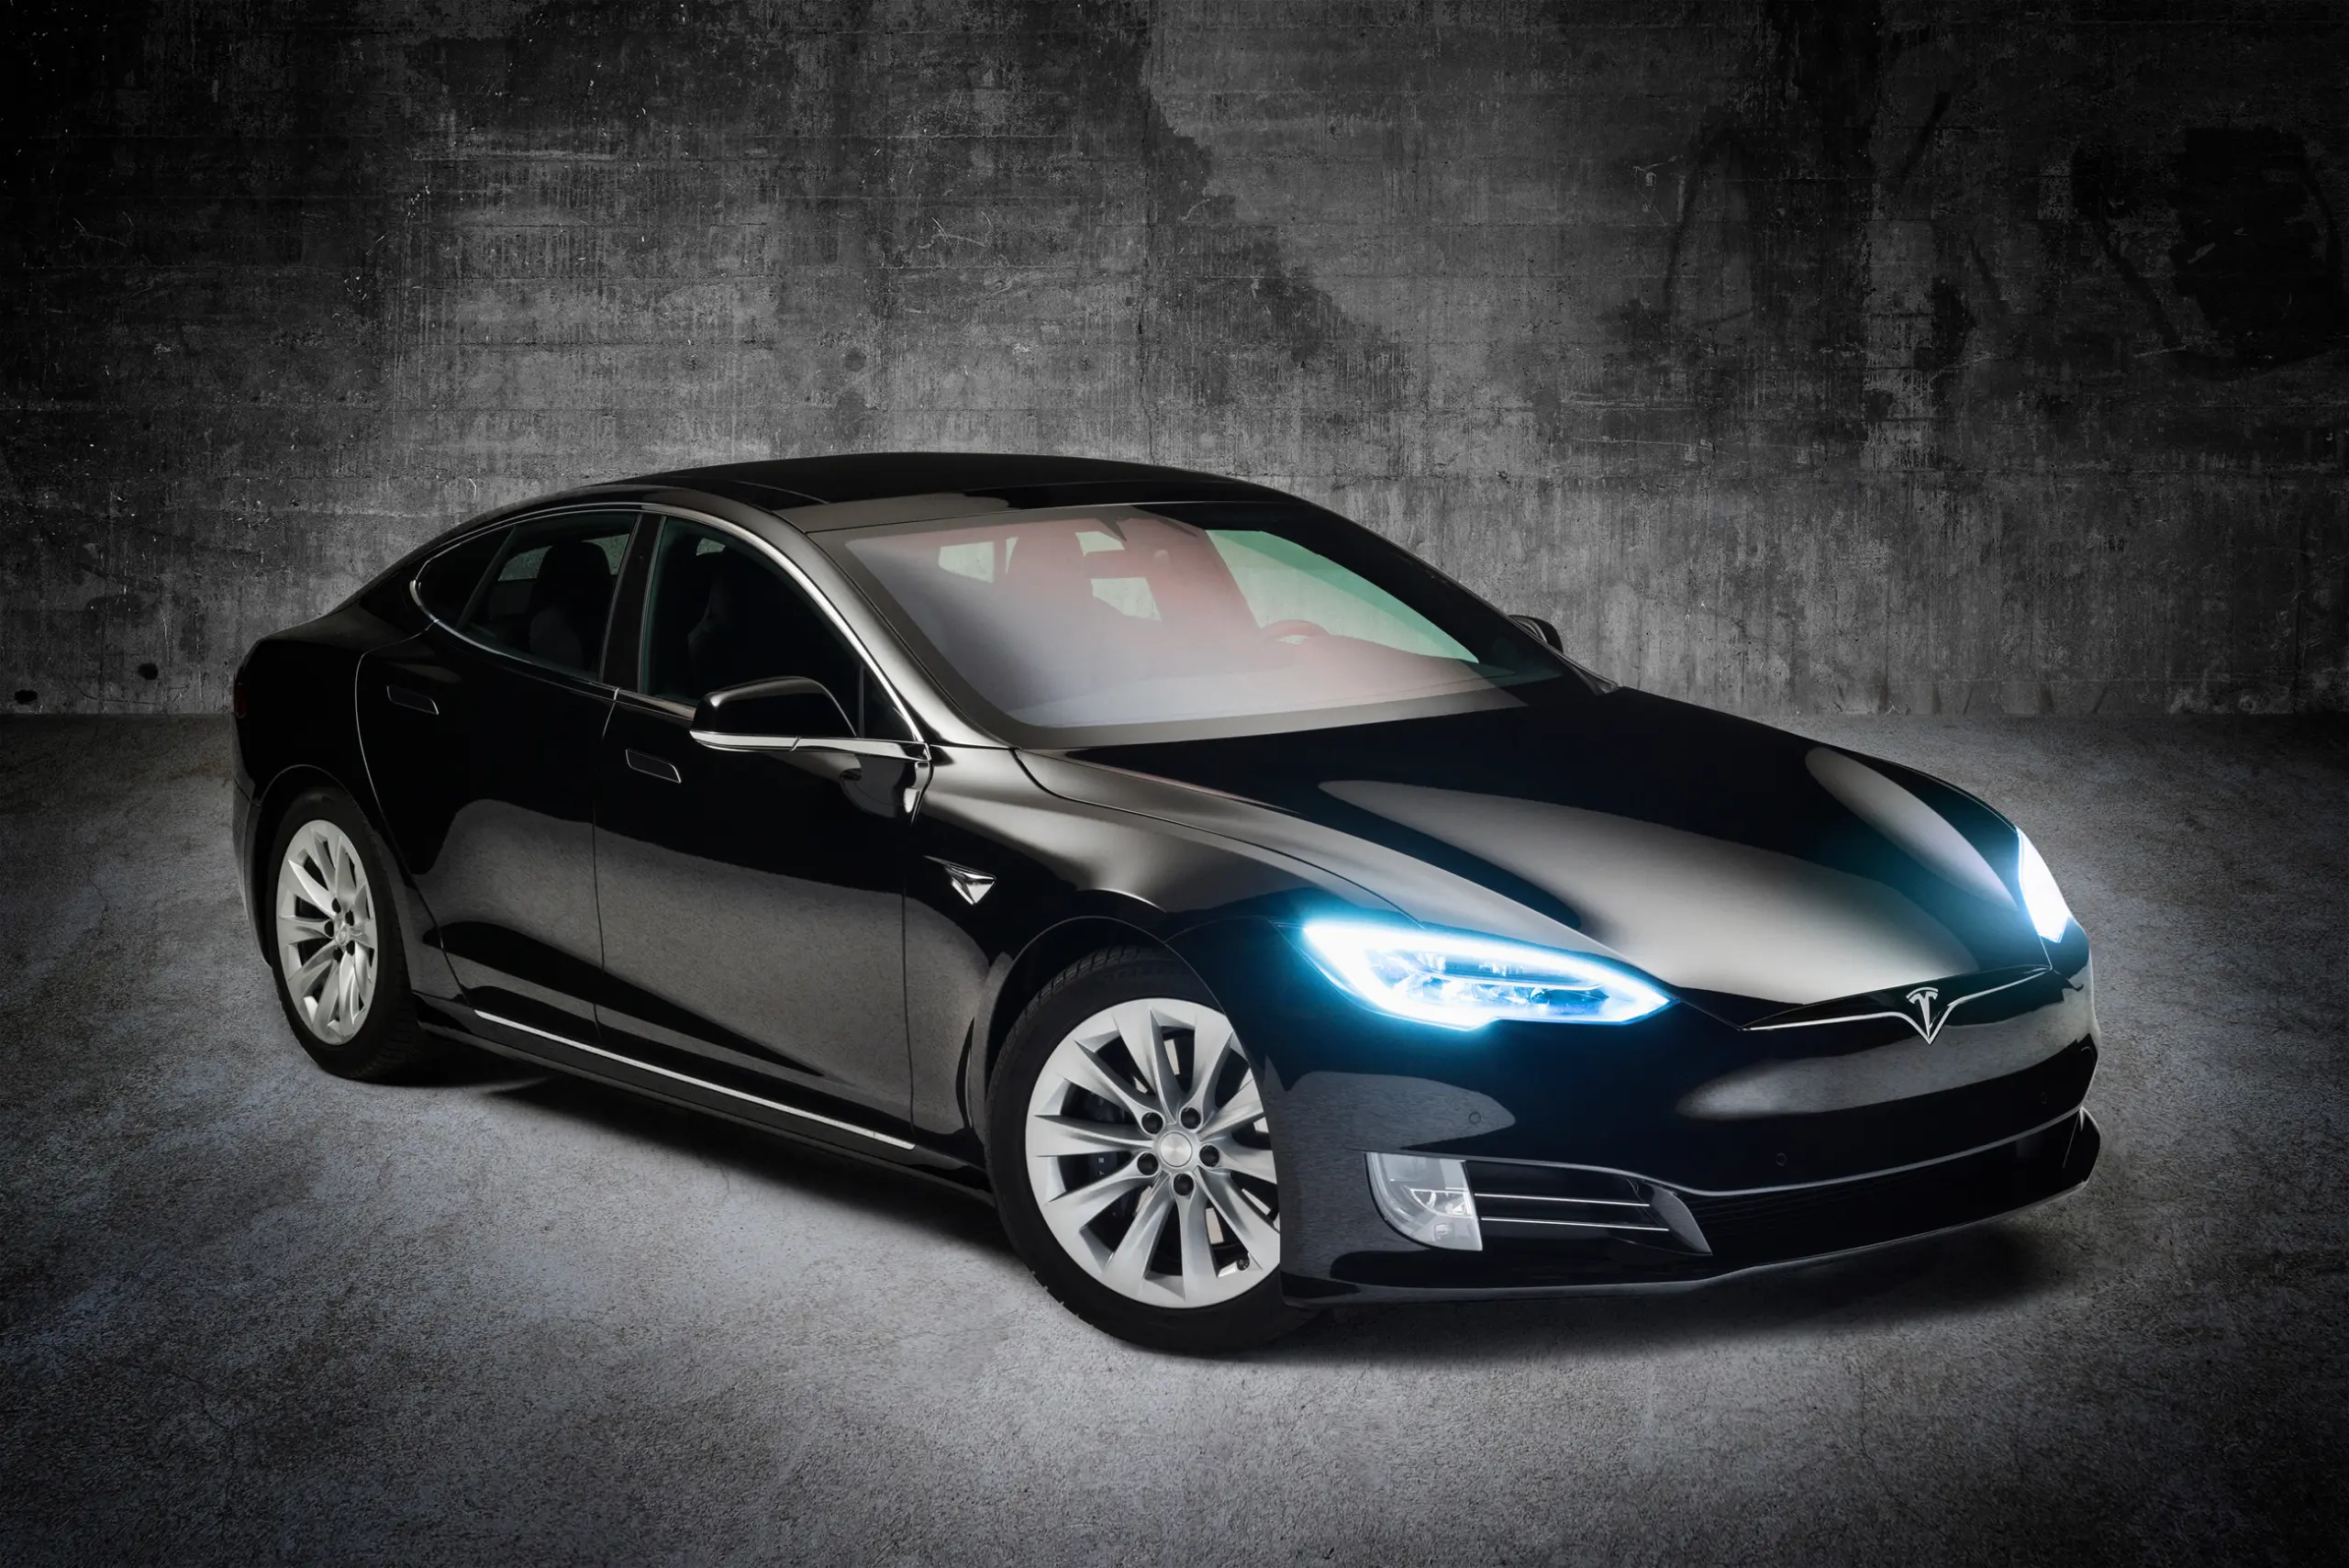 studio photo of a car, tesla model s in black in front of concrete wall, car photography